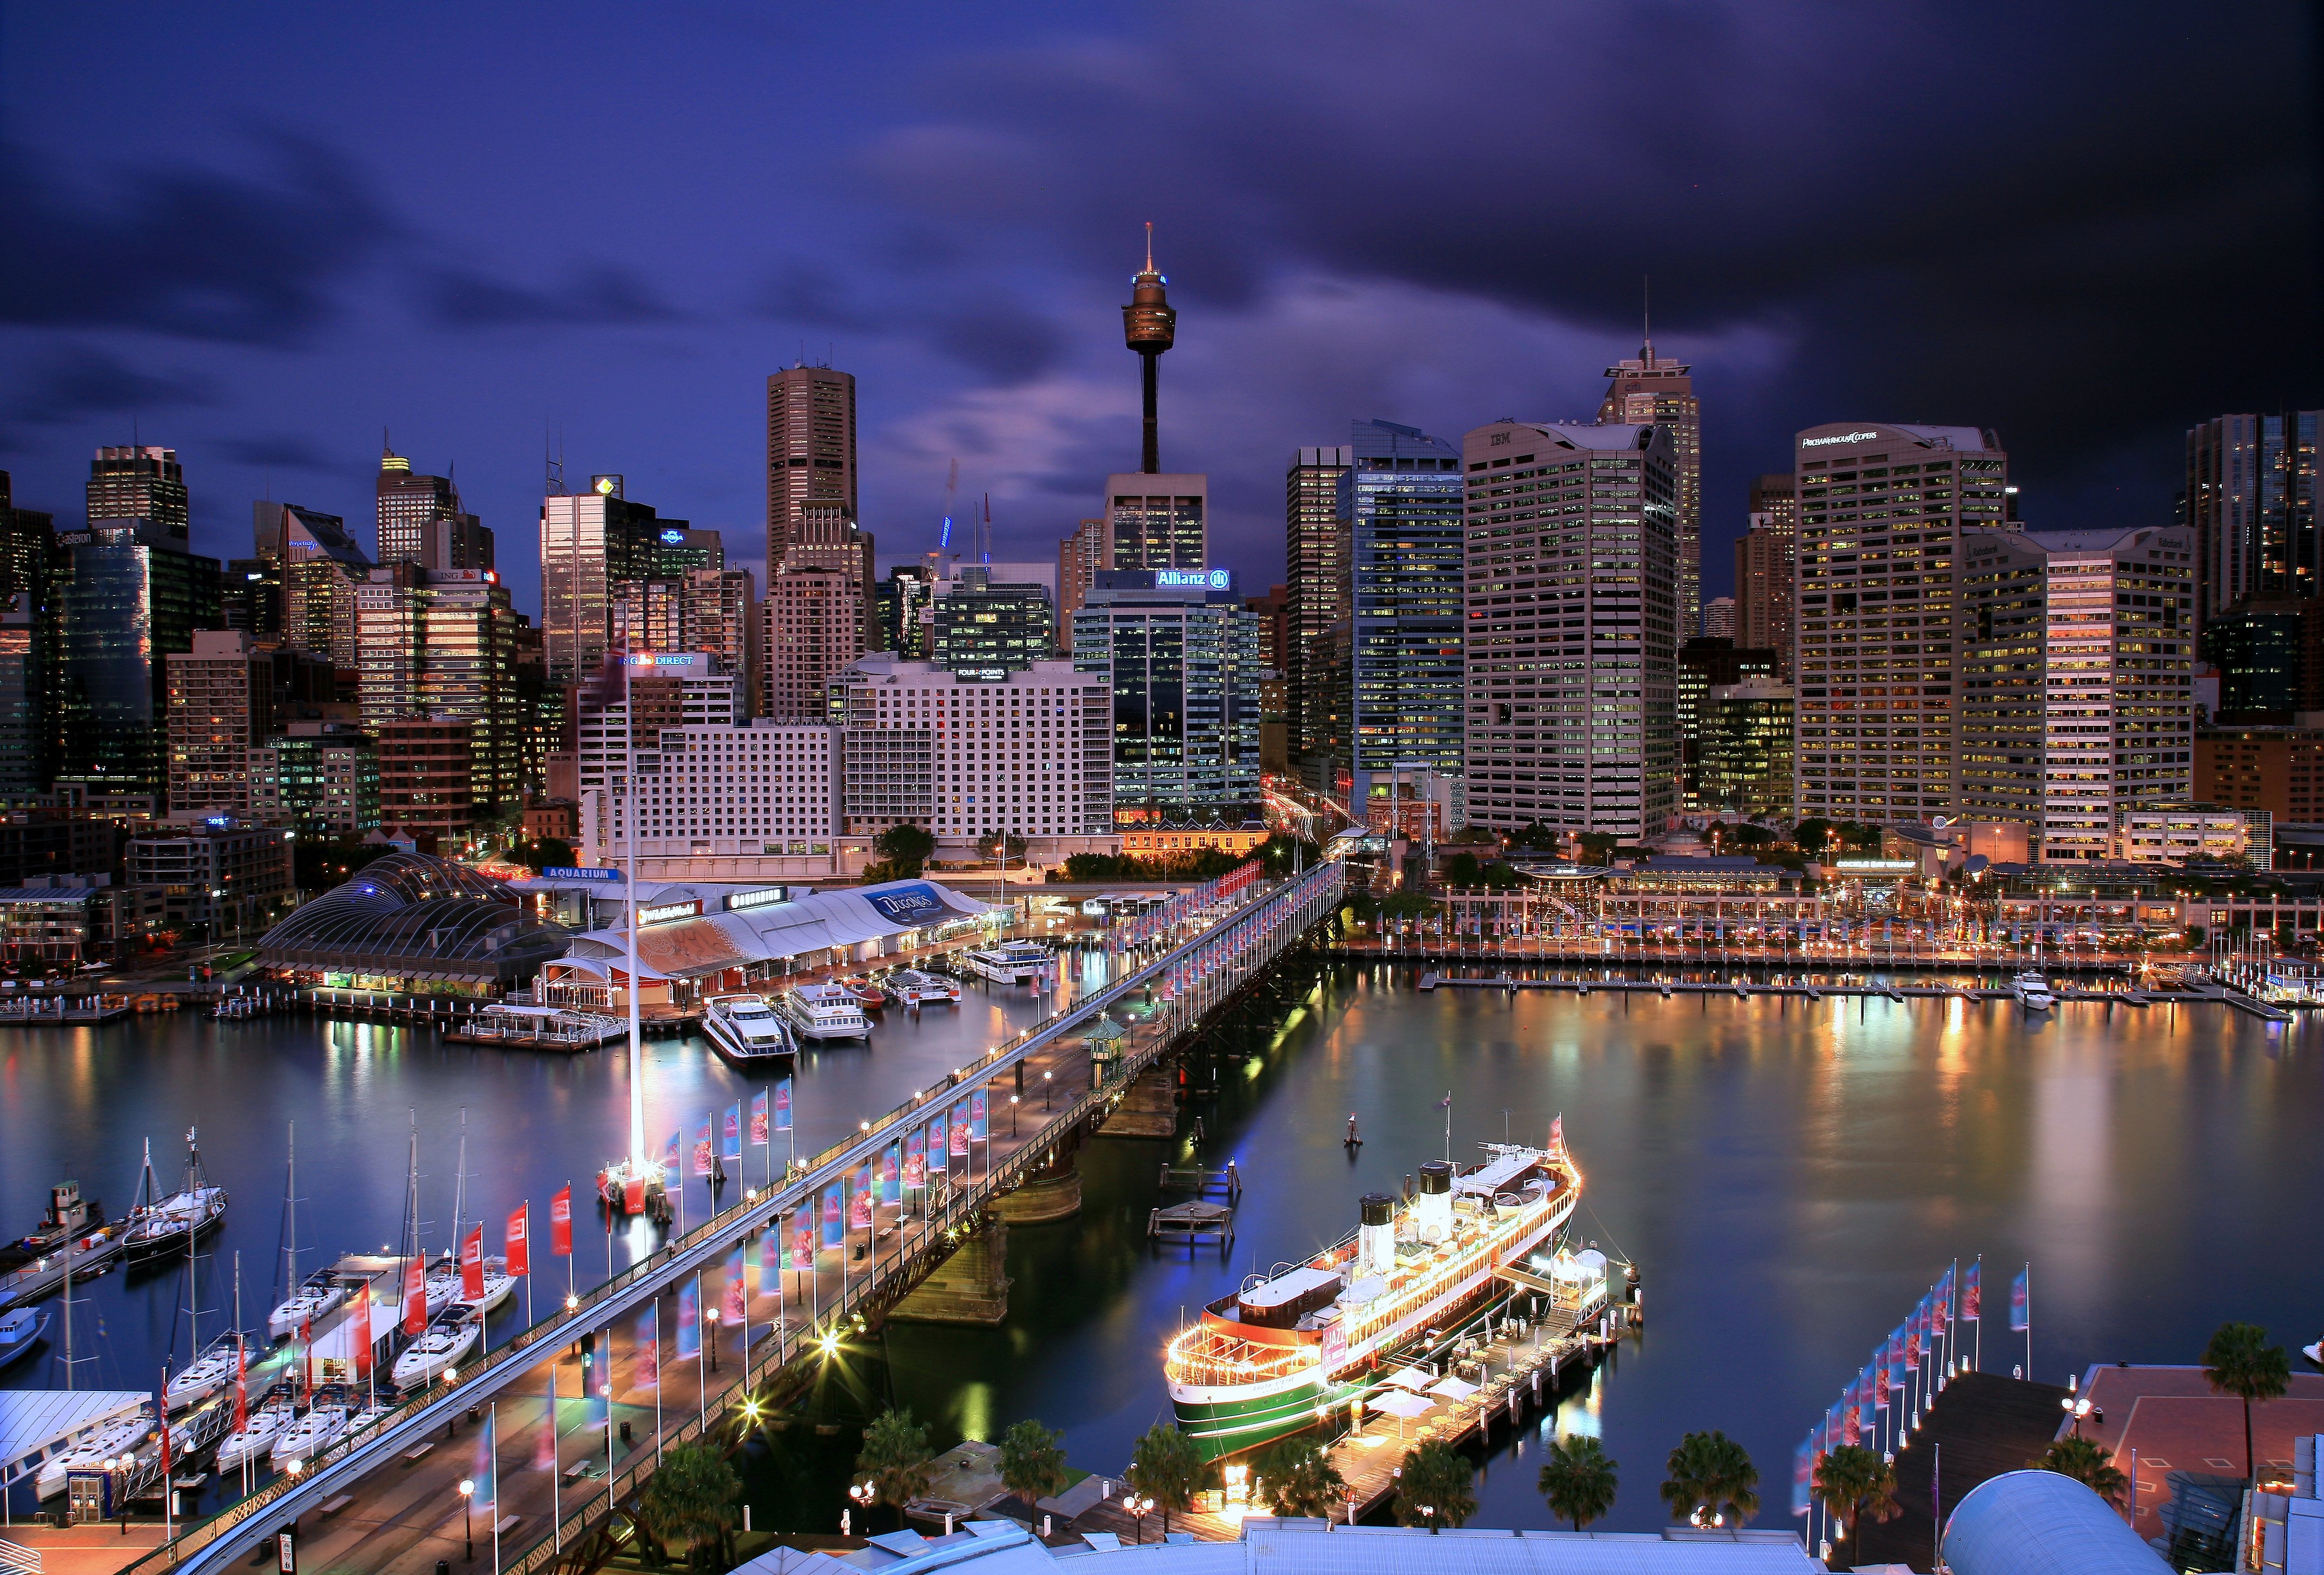 skyscrapers, Buildings, Towers, Rivers, Port, Boats, Ships, Tourism, Books, Lights, Evening, Sky, Clouds, Bridges, Hotels, Trade, Congestion, Globalization, Evolution, Flags, City, Sydney, Australia, Vecher, Dom Wallpaper